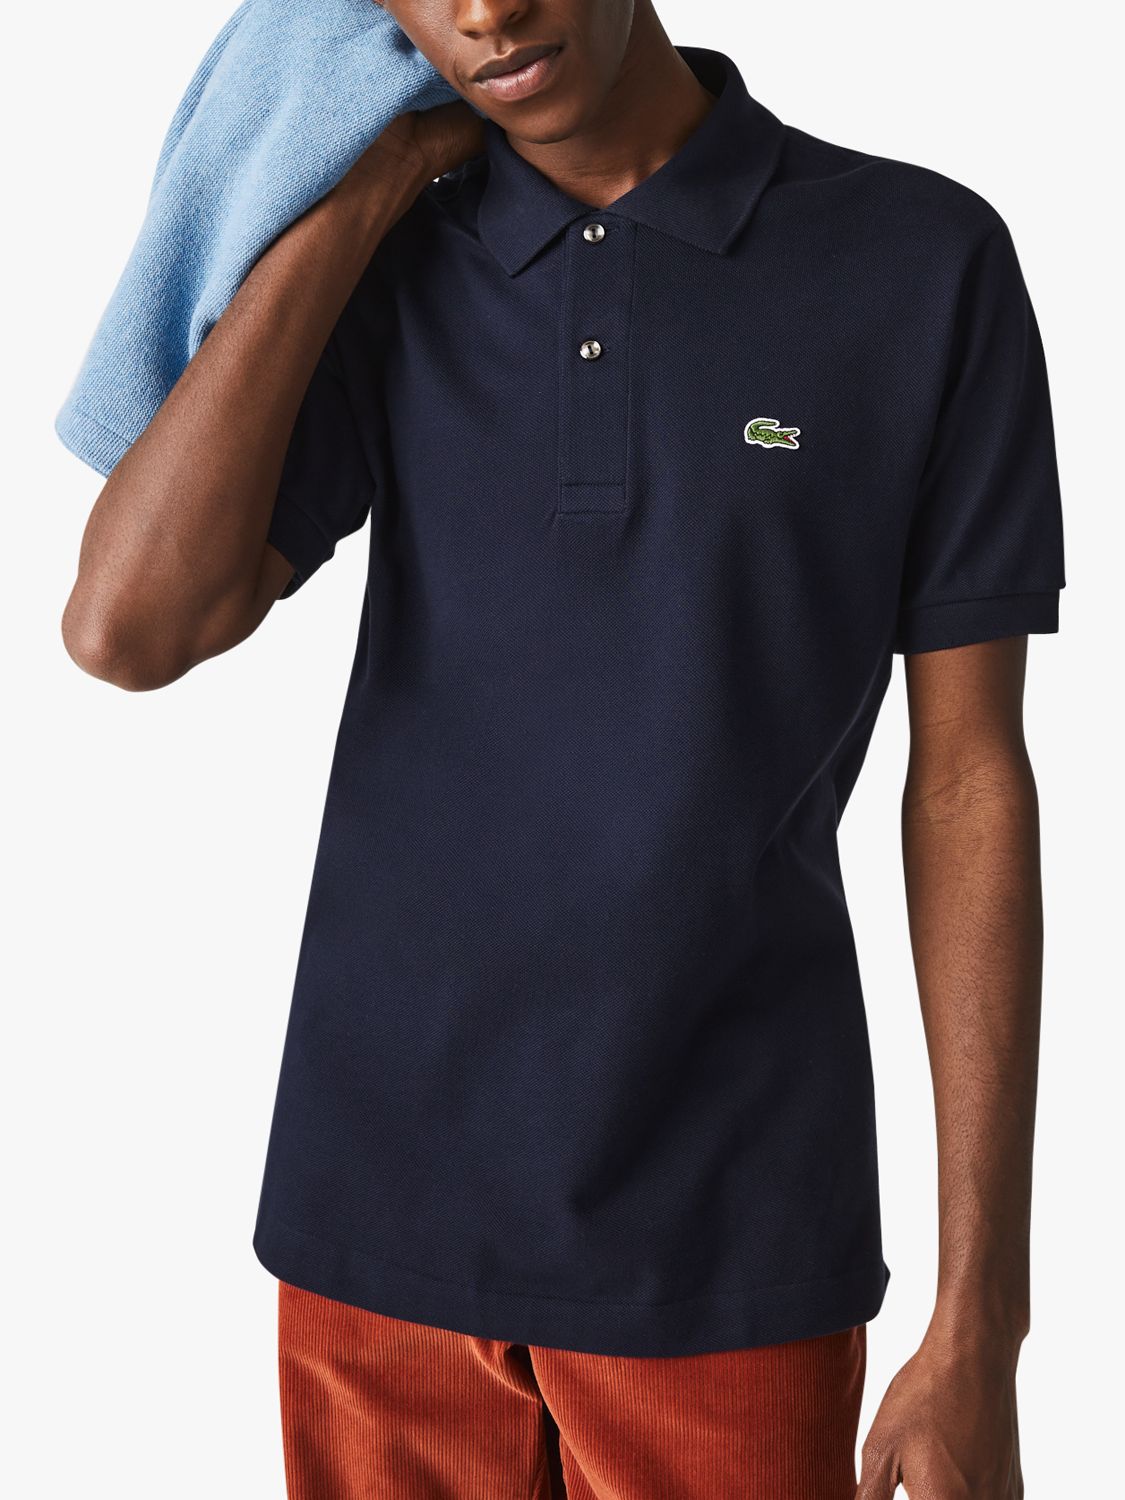 Lacoste L.12.12 Regular Fit Polo Shirt, at John Lewis & Partners